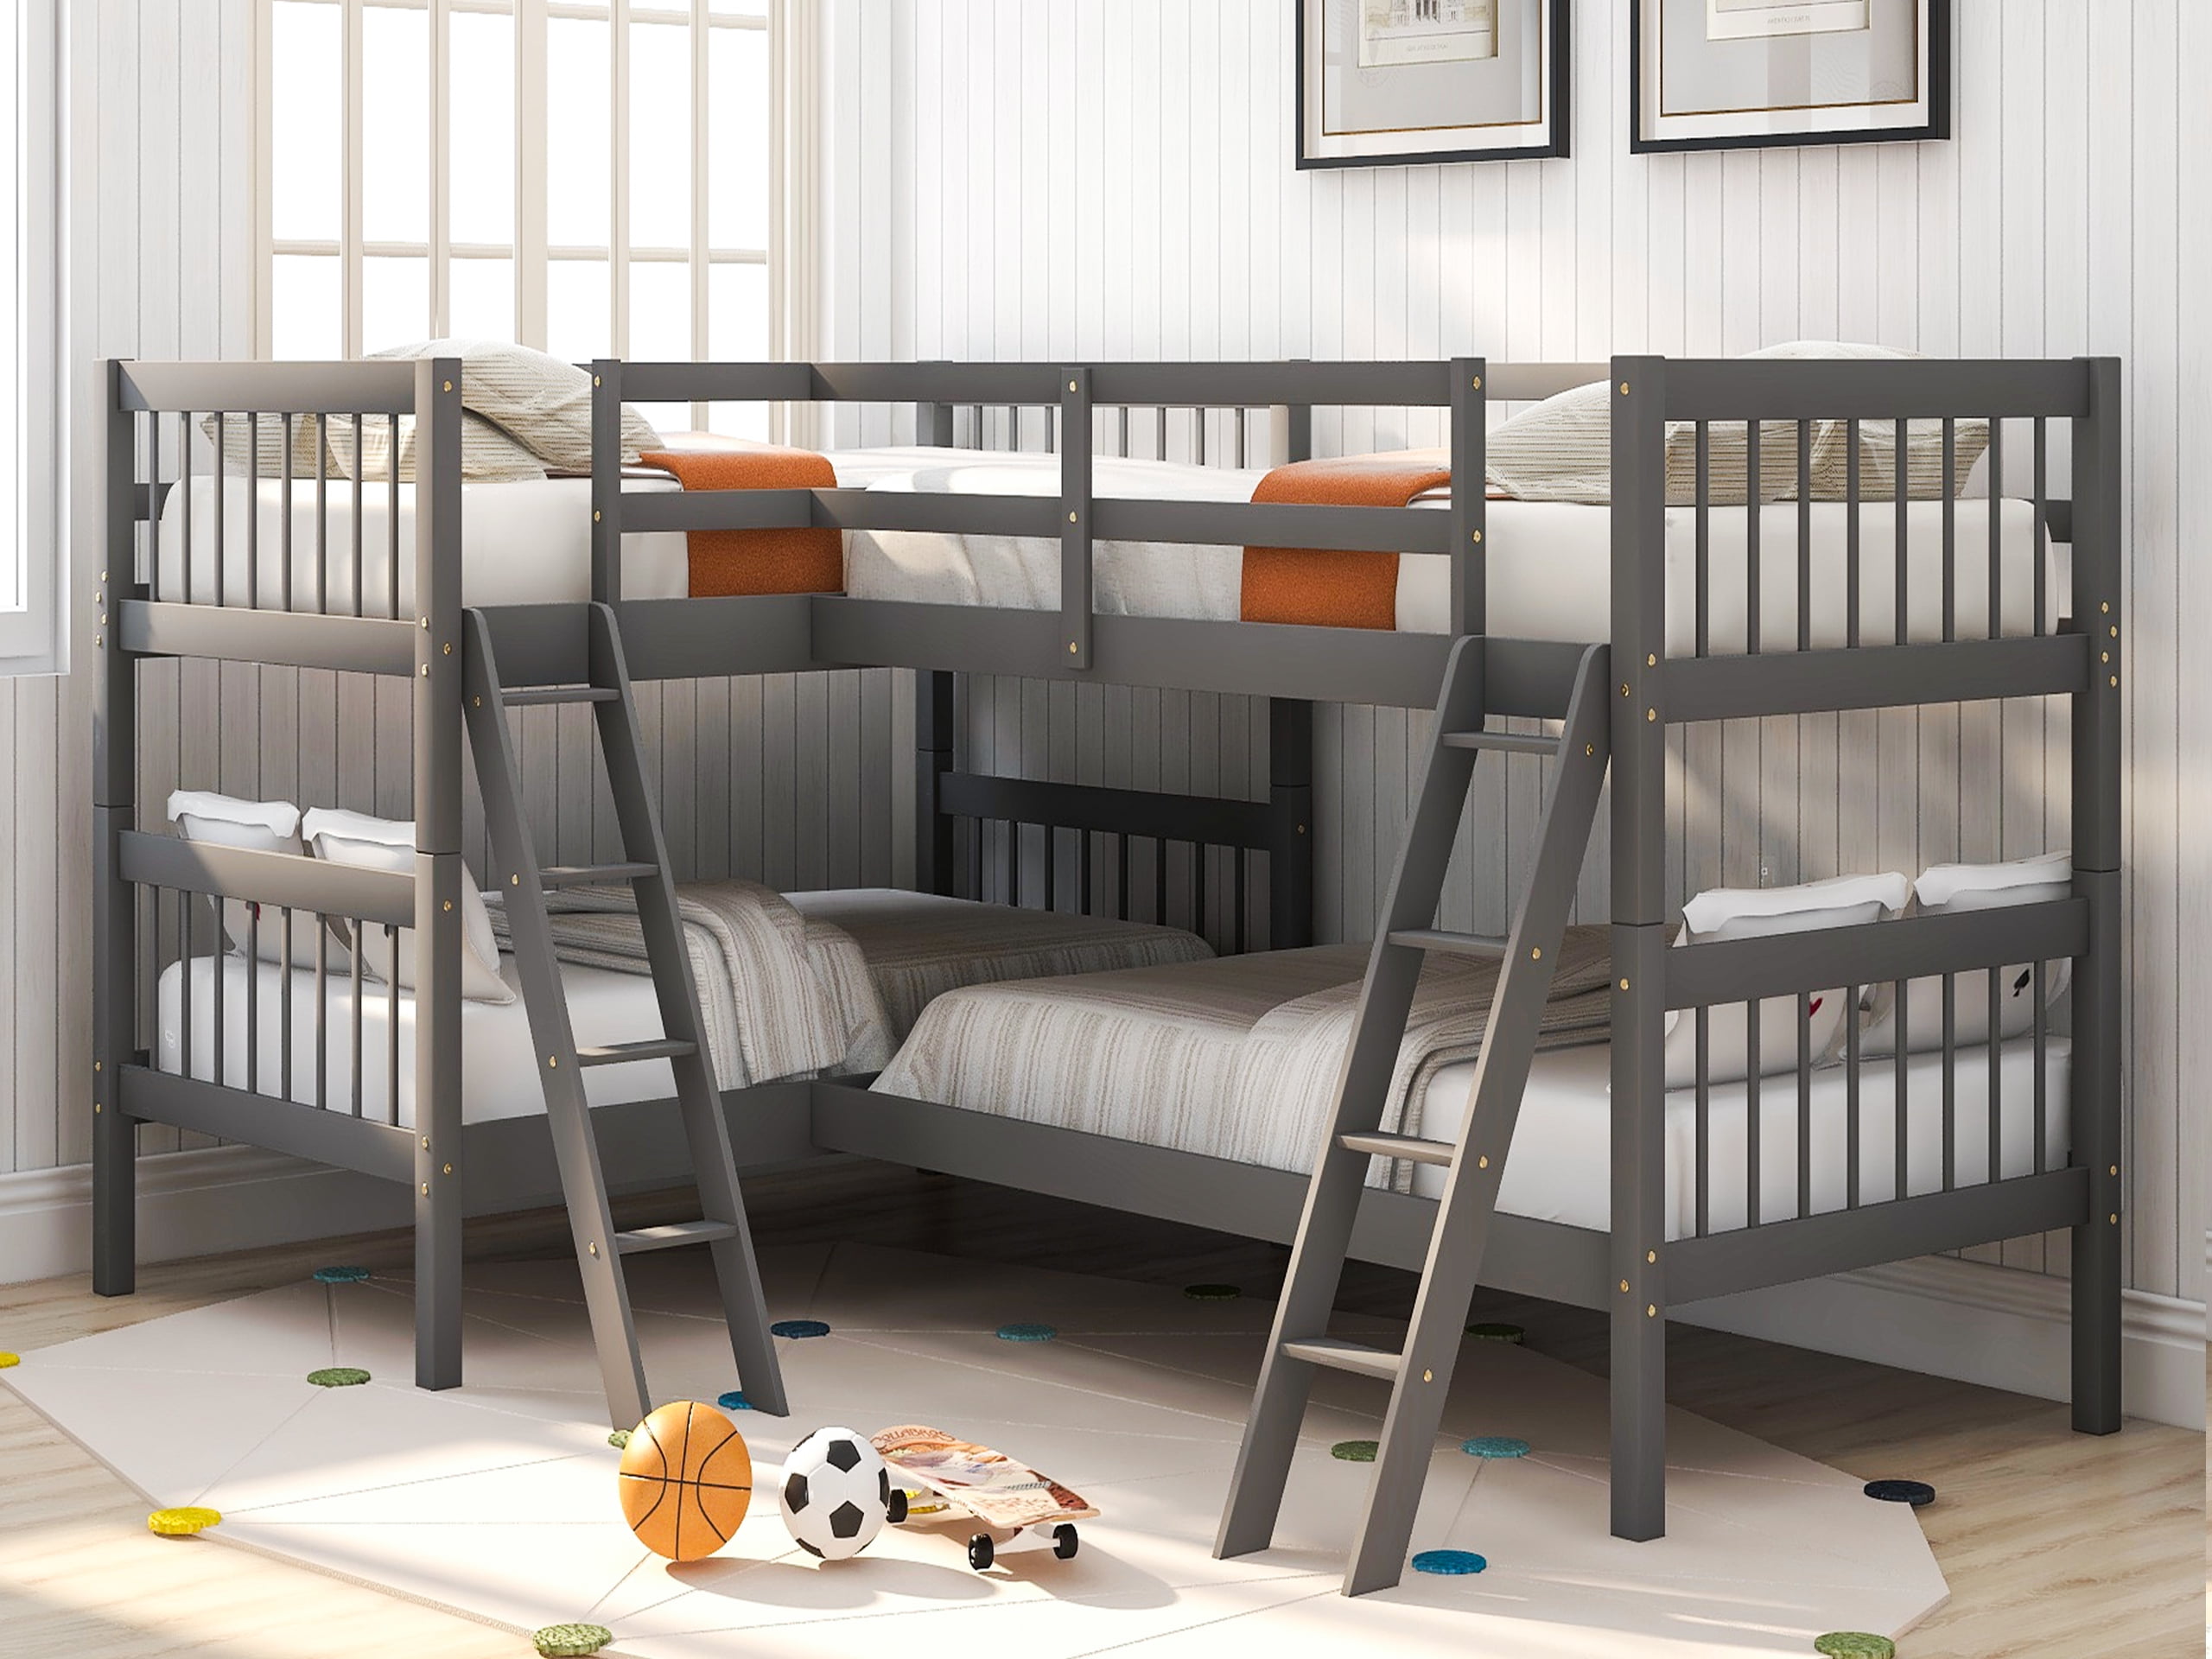 L Shaped Bunk Bed Twin Size Four Kids, 2 Bunk Beds